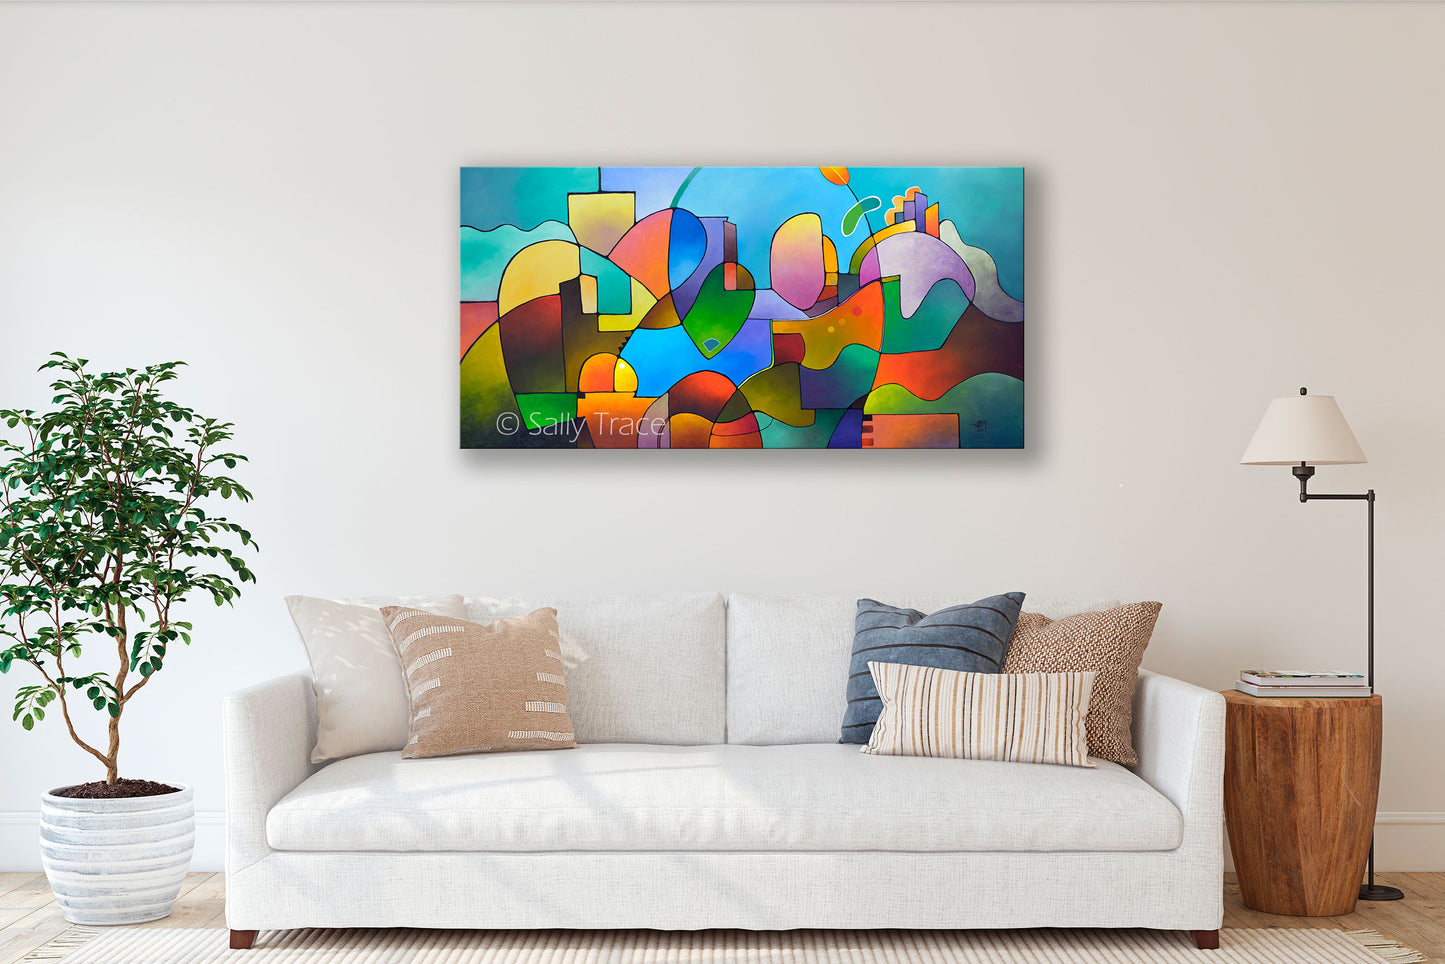 “Diversification” abstract landscape fine art prints, contemporary modern geometric colorful abstract art prints, geometric abstract wall art prints by Sally Trace, room view